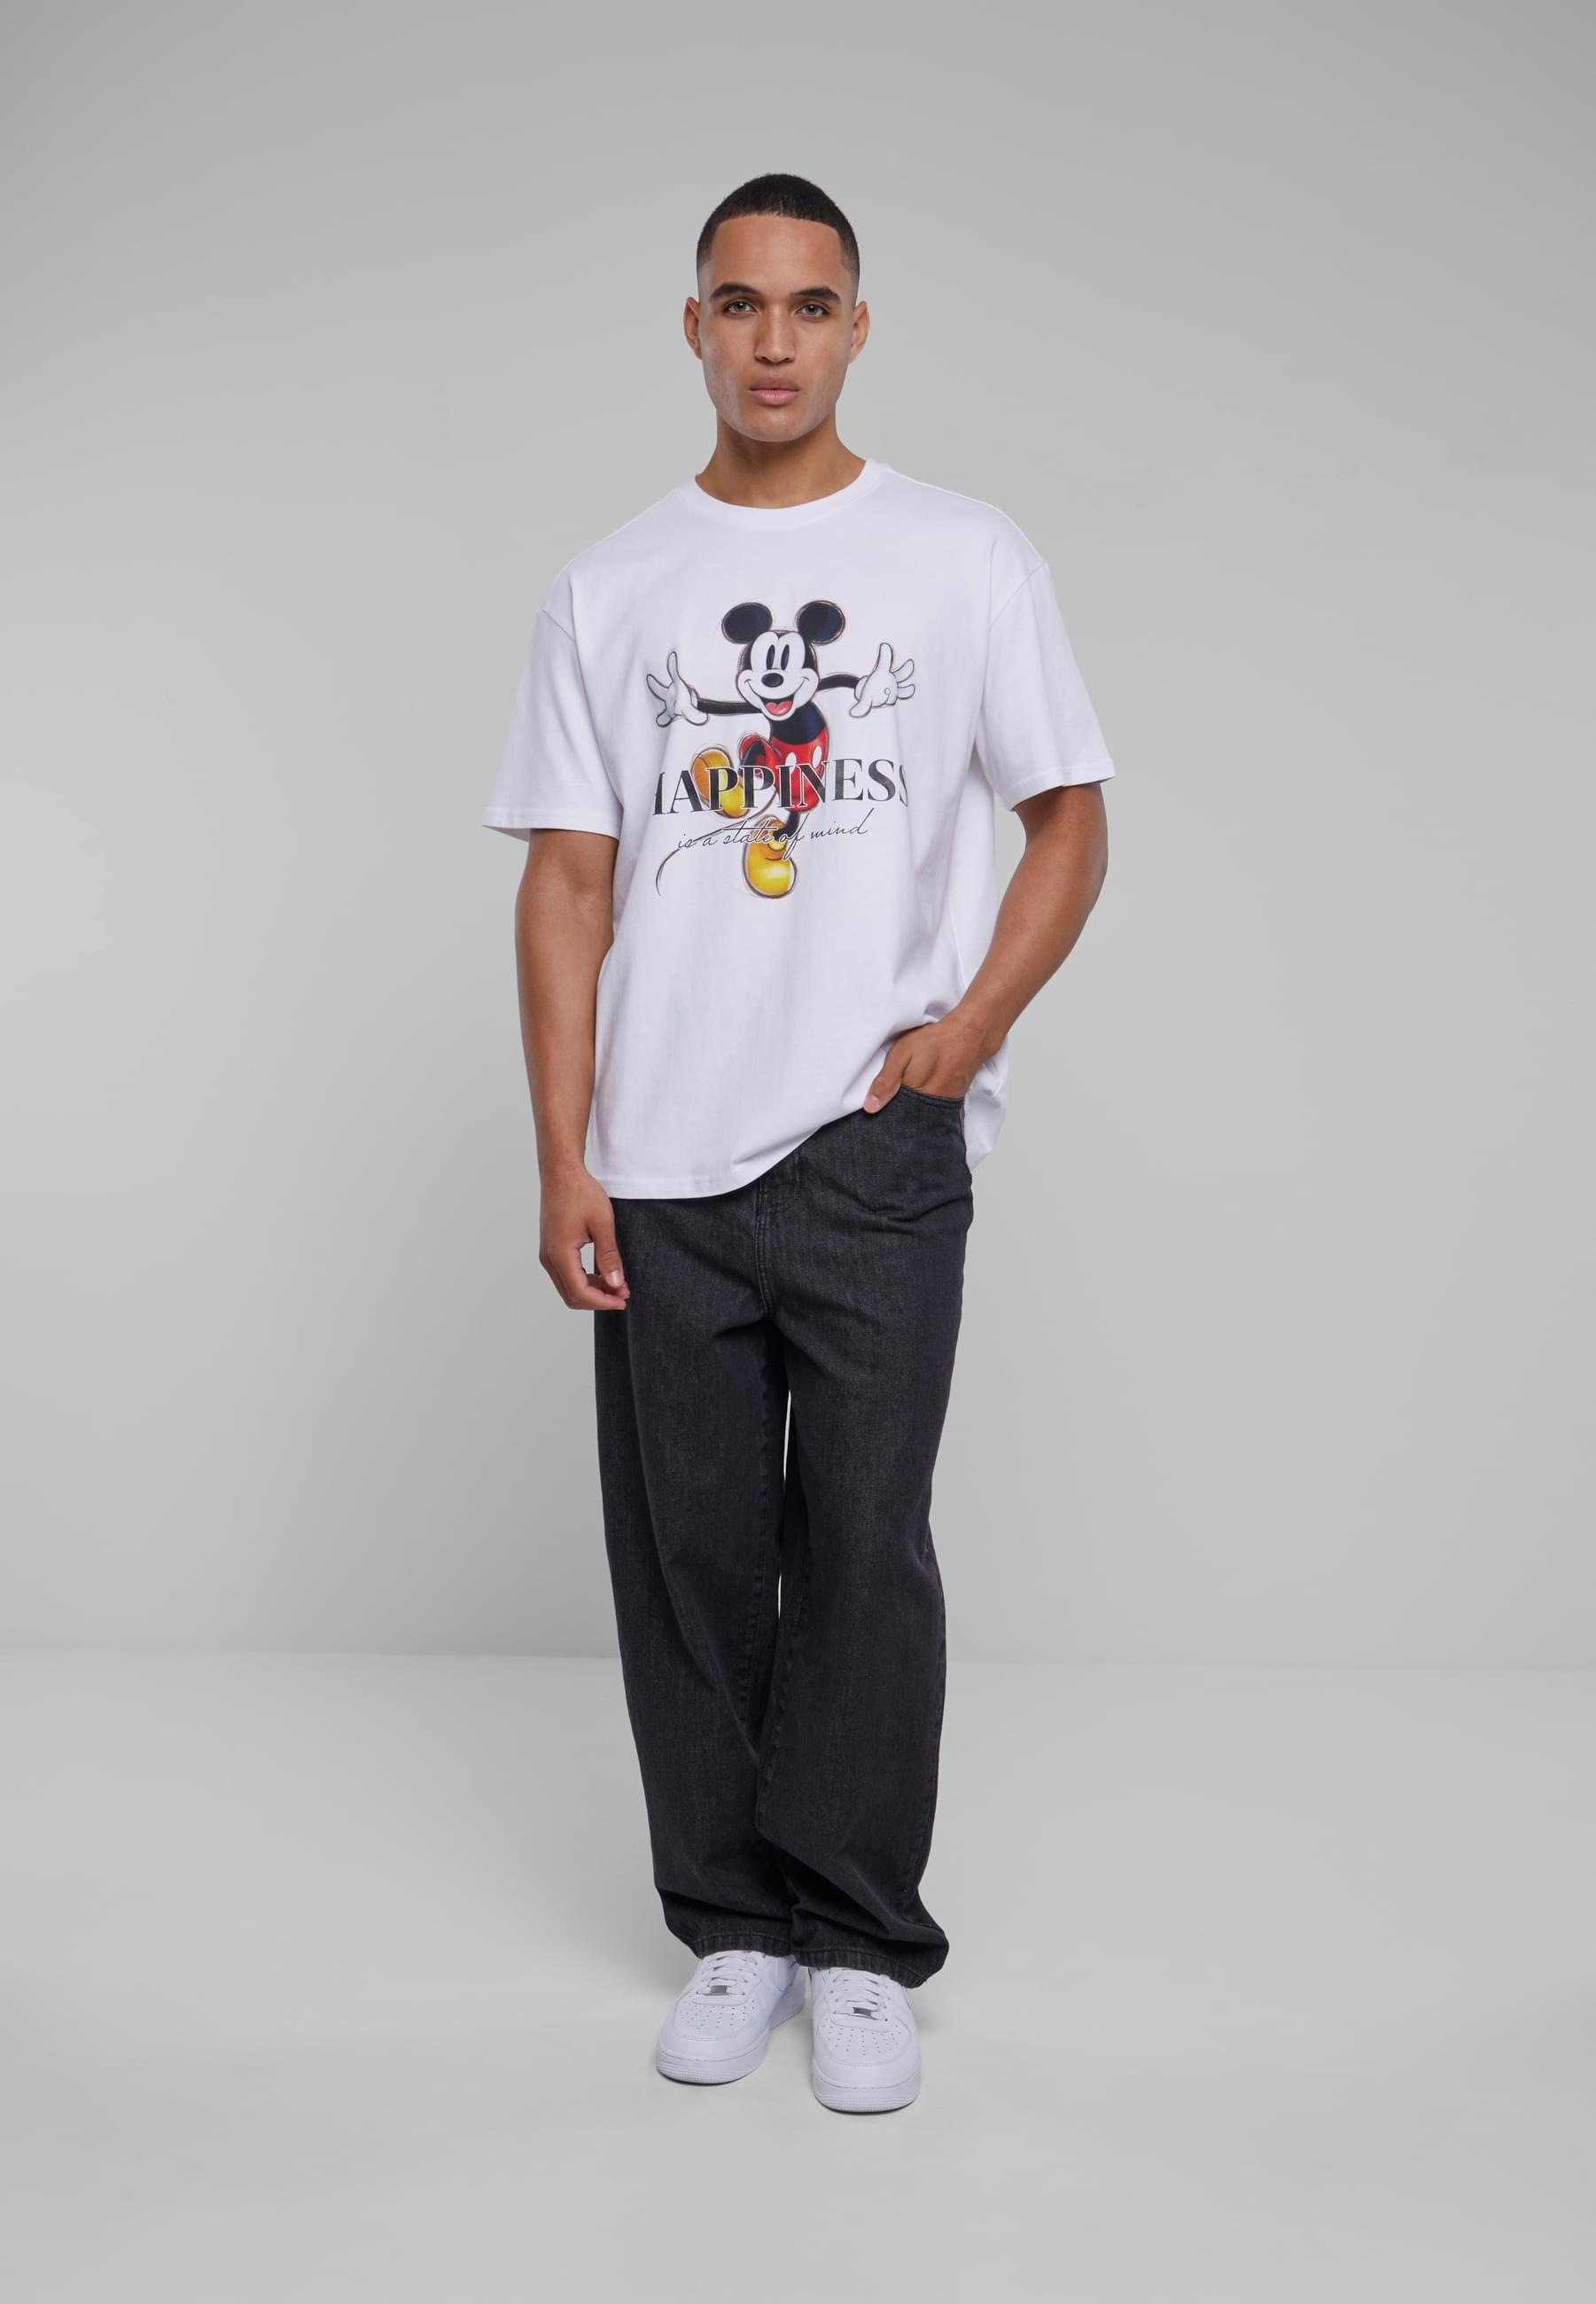 Upscale by Mister Tee T-Shirt Oversize kaufen tlg.) Happiness Tee«, Disney 100 online | Mickey »Unisex (1 BAUR